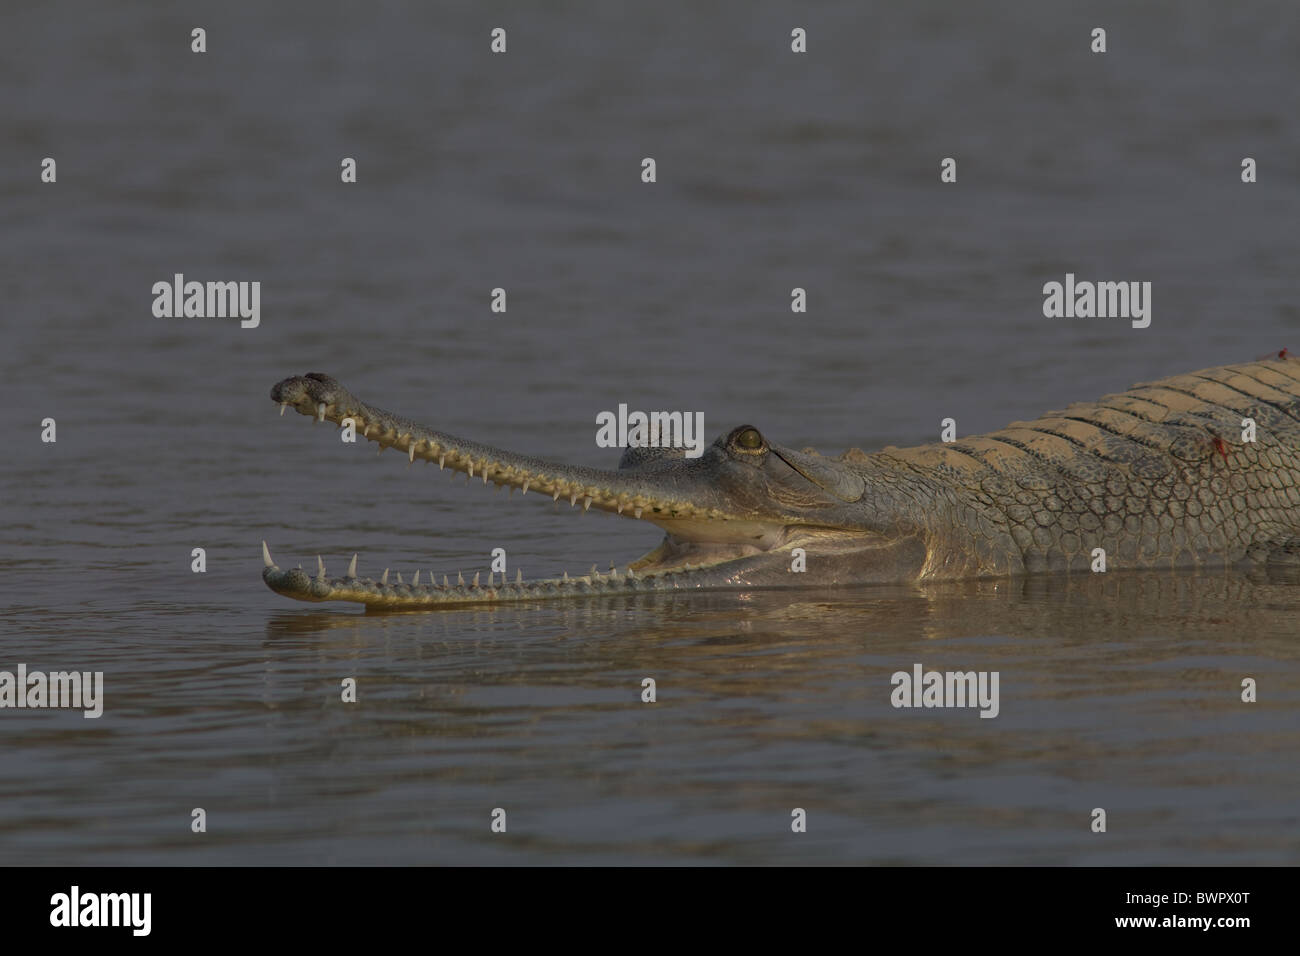 Gharial with mouth open in the Chambal River at National Chambal Sanctuary, India Stock Photo